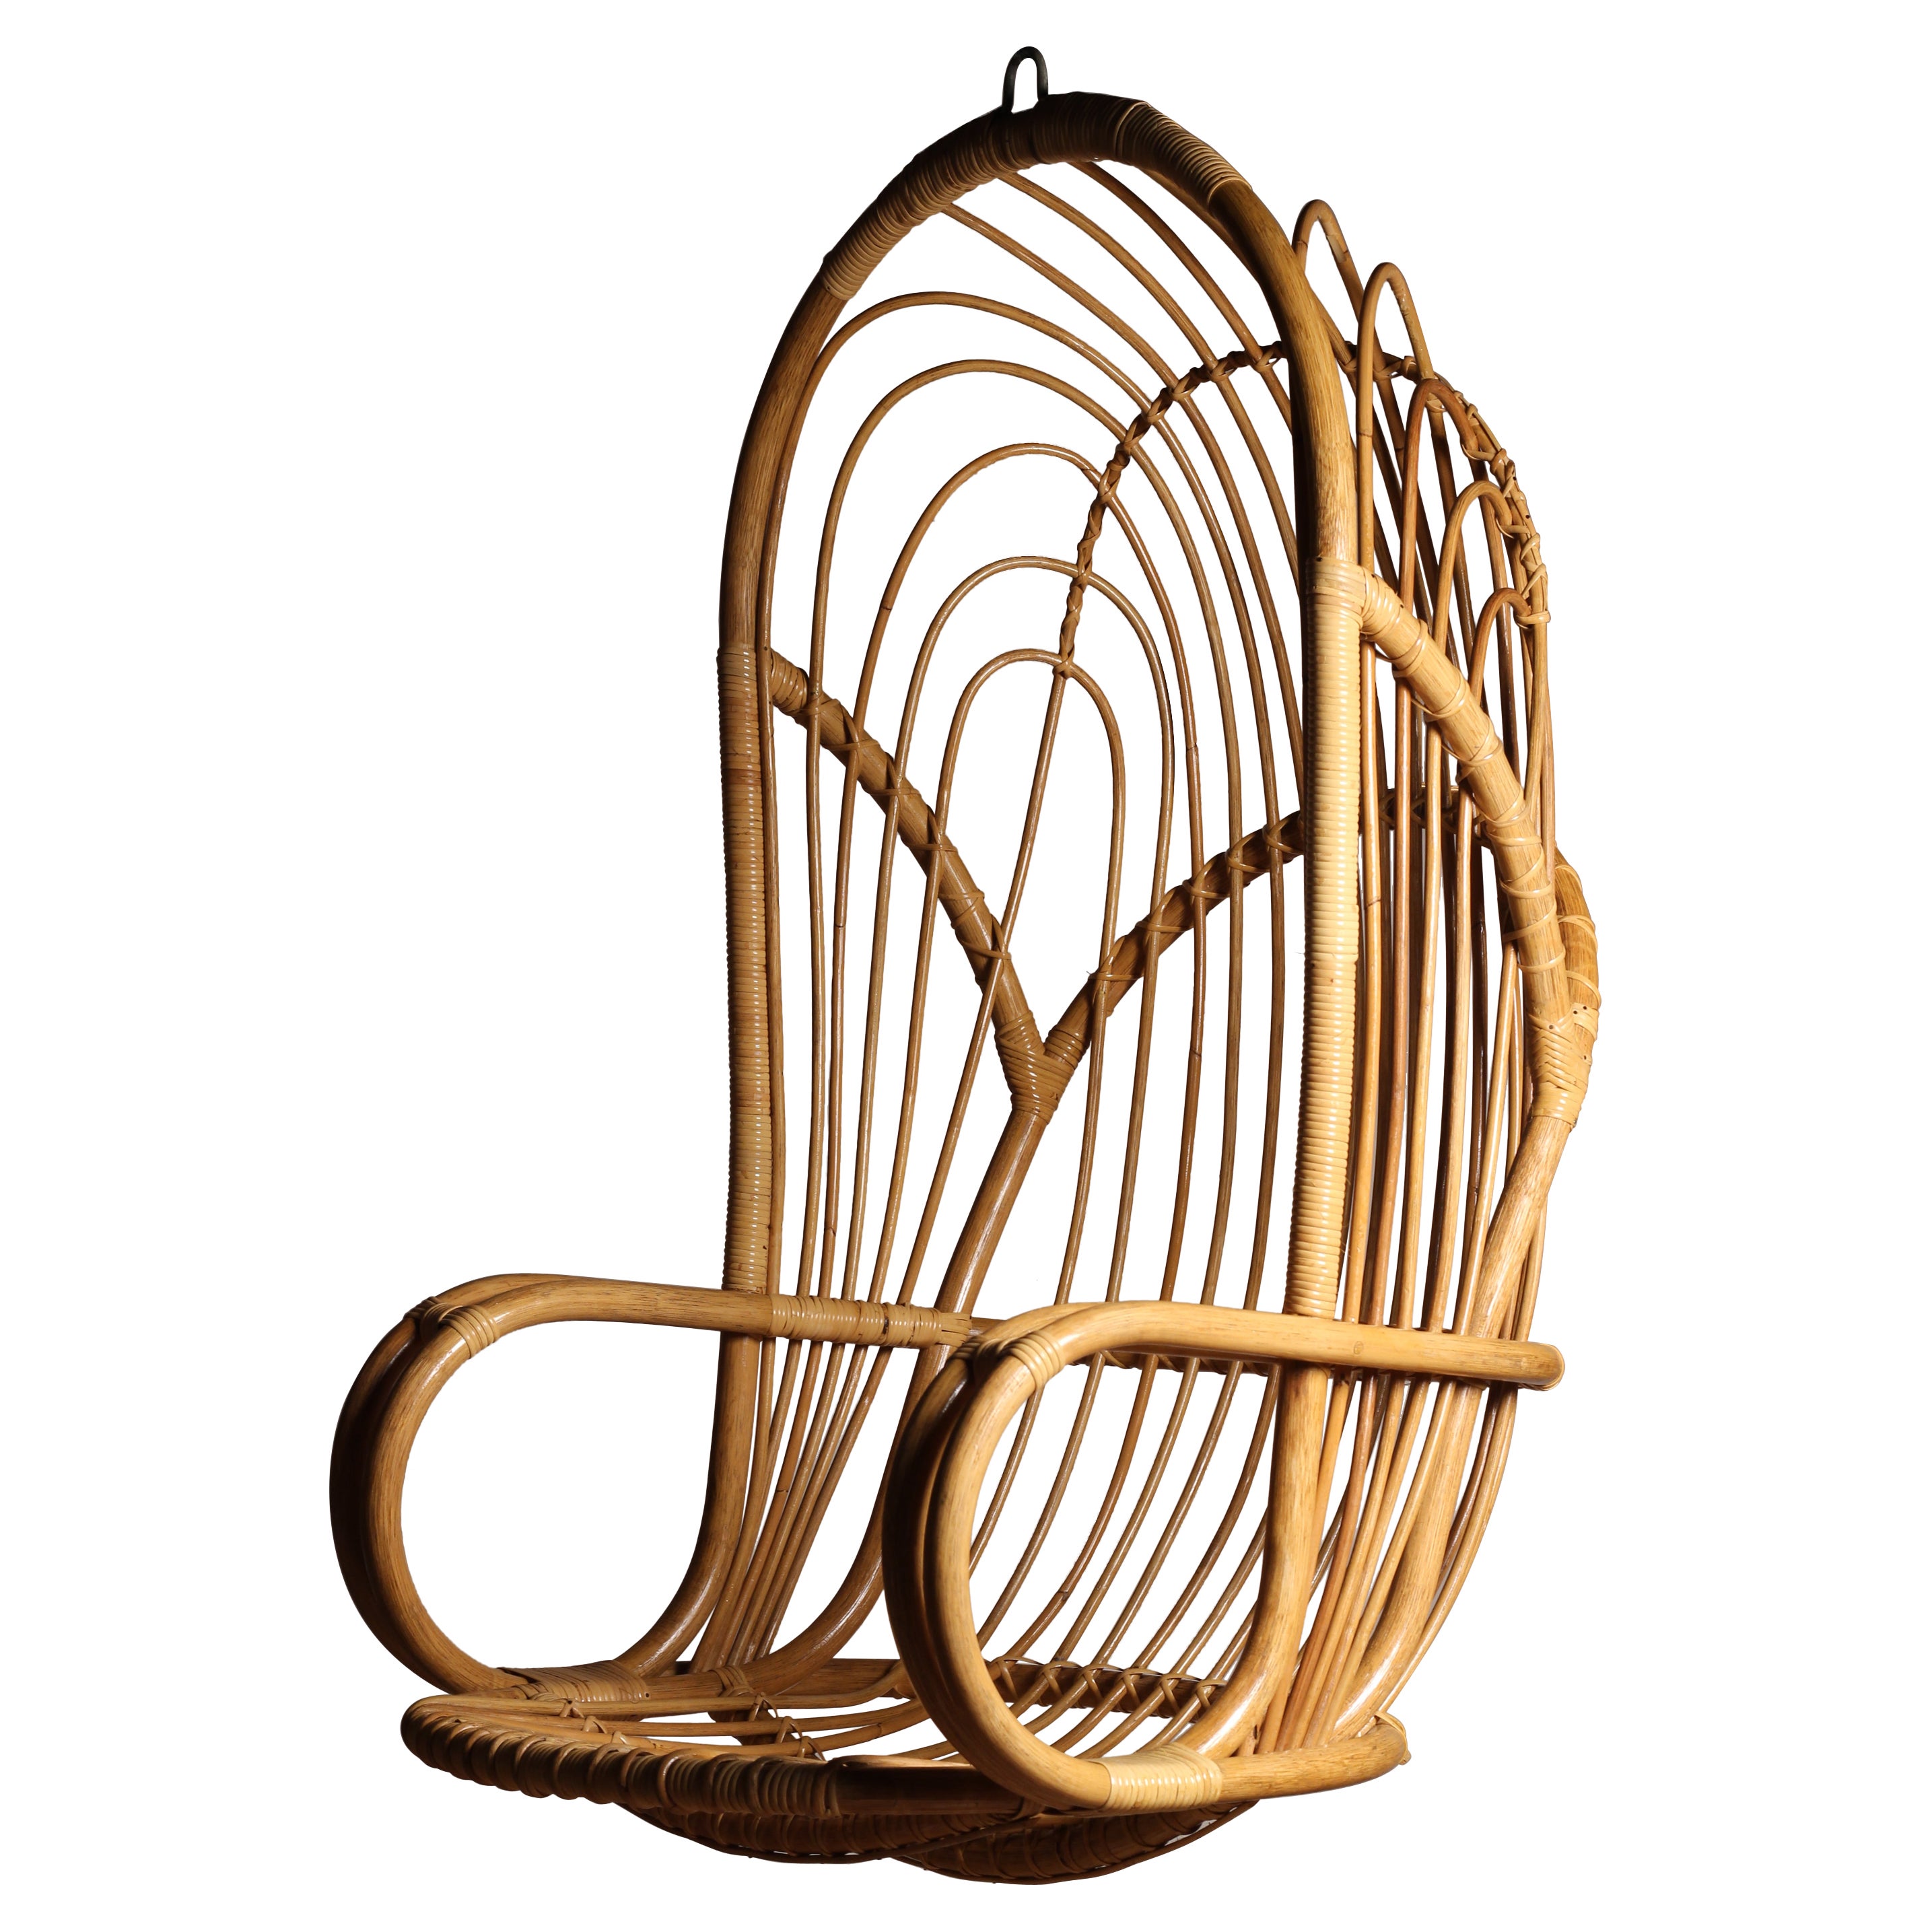 Boho Chic Style 1960’s Wicker and Cane Hanging Chair by Rohe Noordwolde